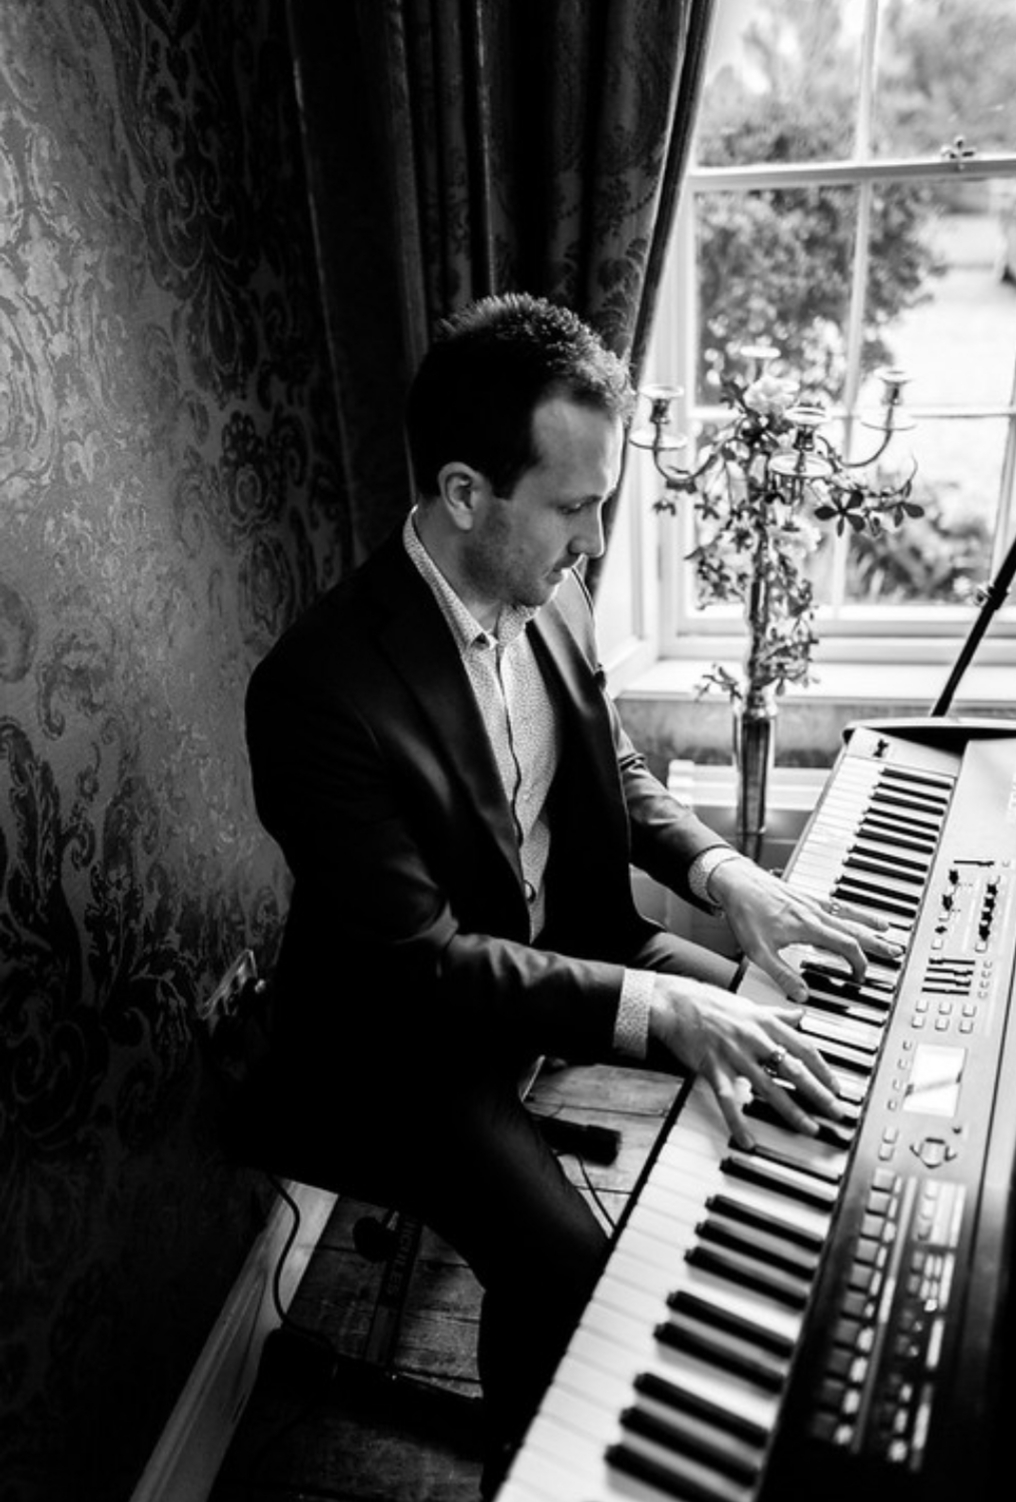 Joe Kenny playing piano at a wedding ceremony in Ghan House, Carlingford